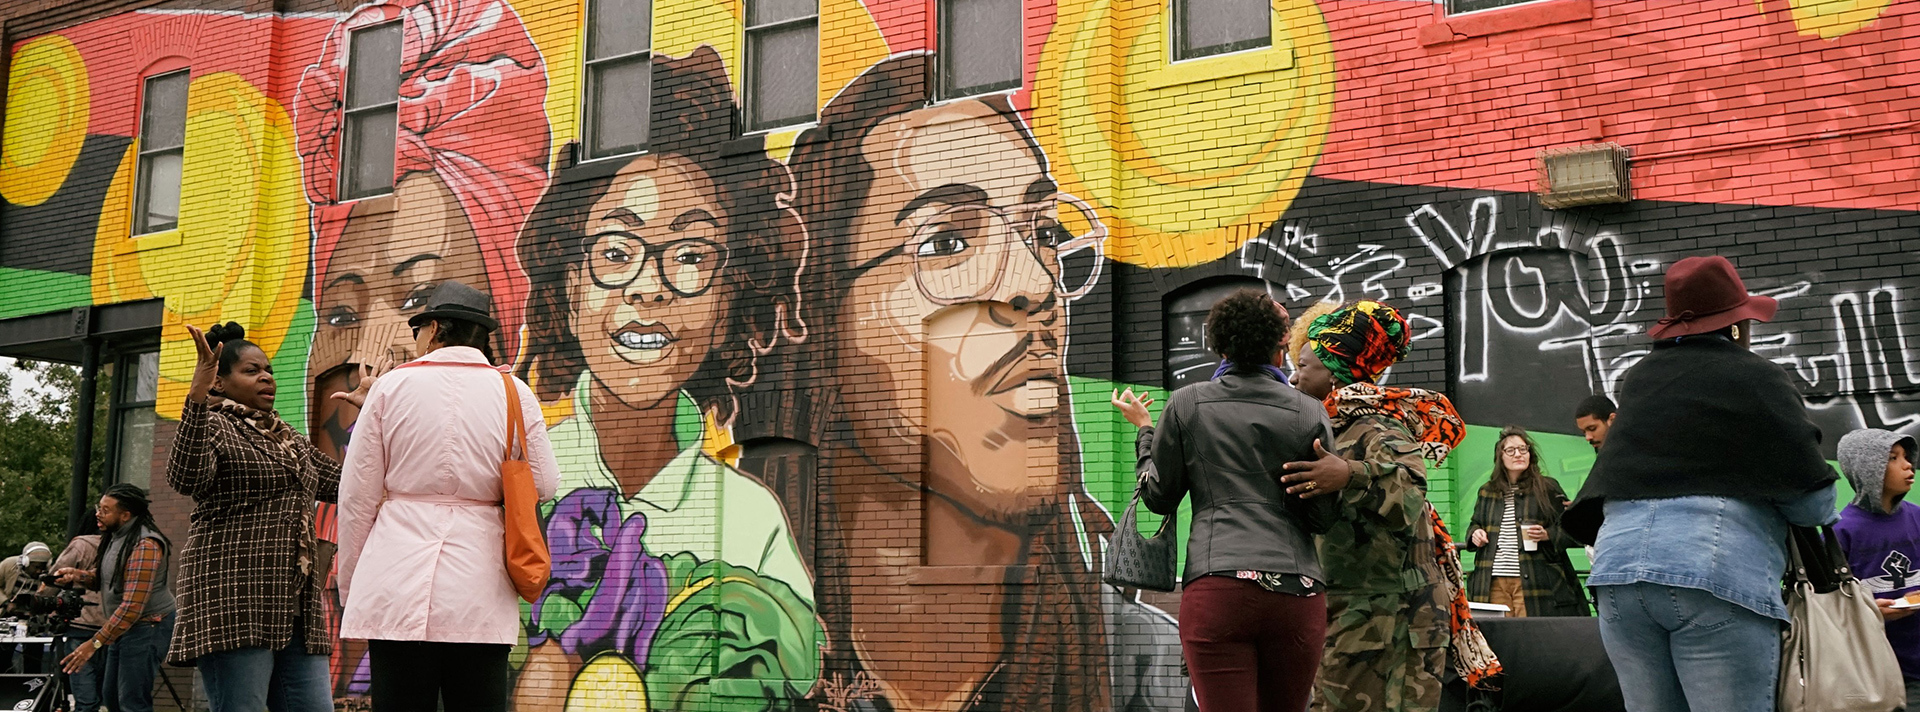 Header-Neighborhood Arts - Community members in conversation stand in front of the mural "Ancestor, Identity, and the Seed" featuring portraits of 3 Black people of different ages against the Pan-African flag.